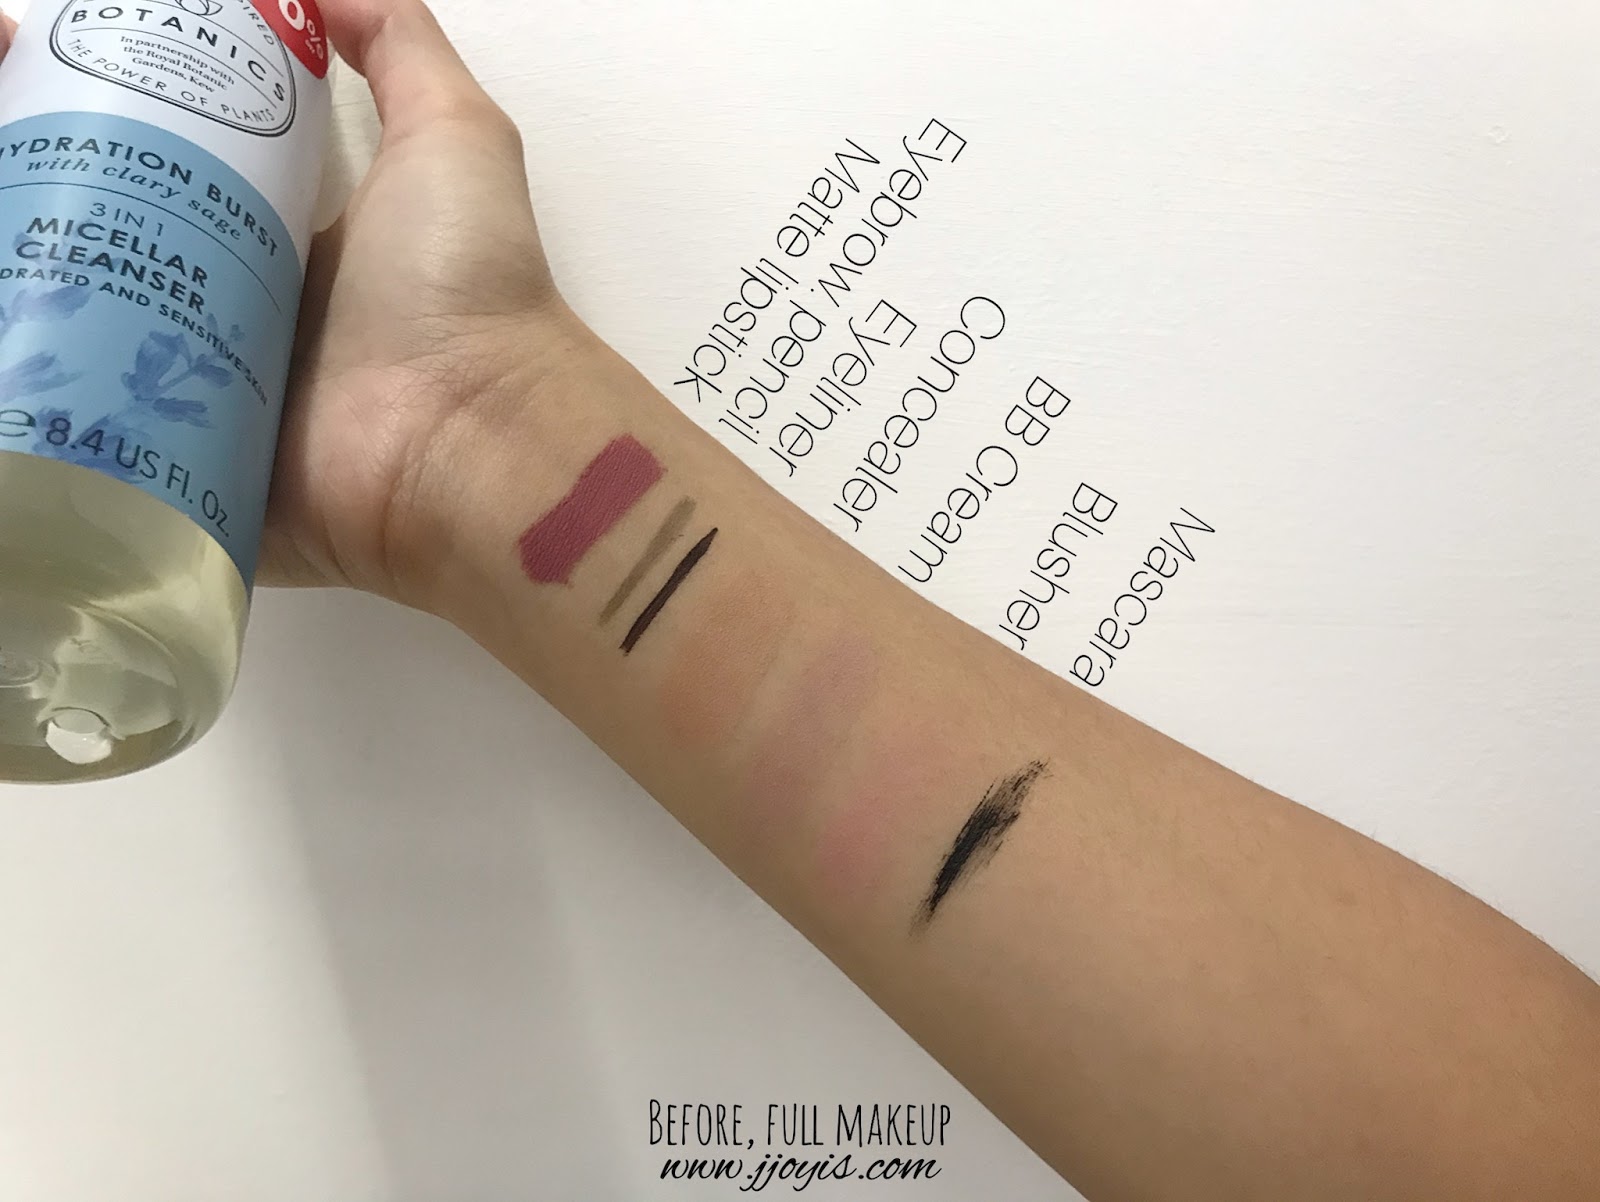 botanics micellar water hydration burst review swatch test arm with make up